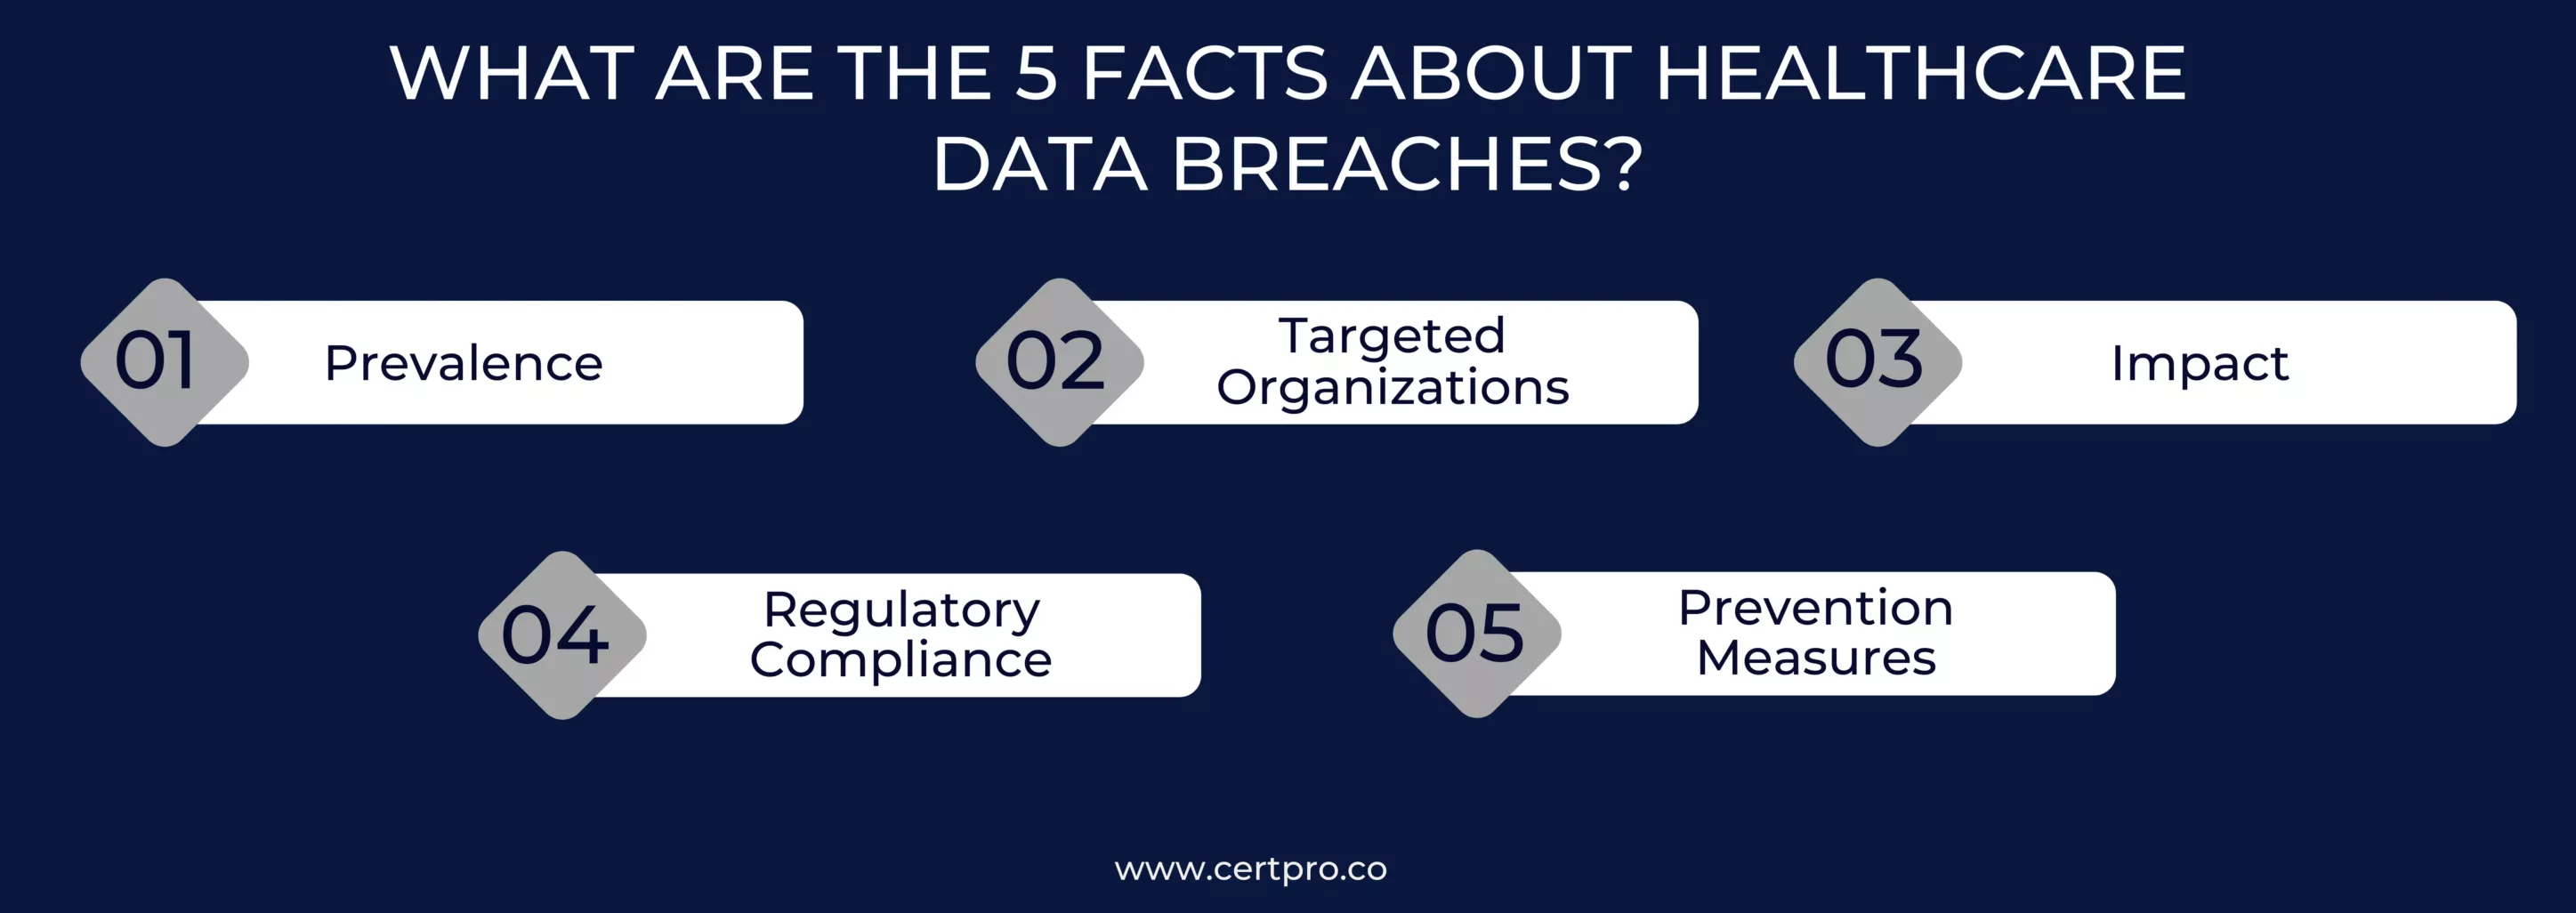 WHAT ARE THE 5 FACTS ABOUT HEALTHCARE DATA BREACHES